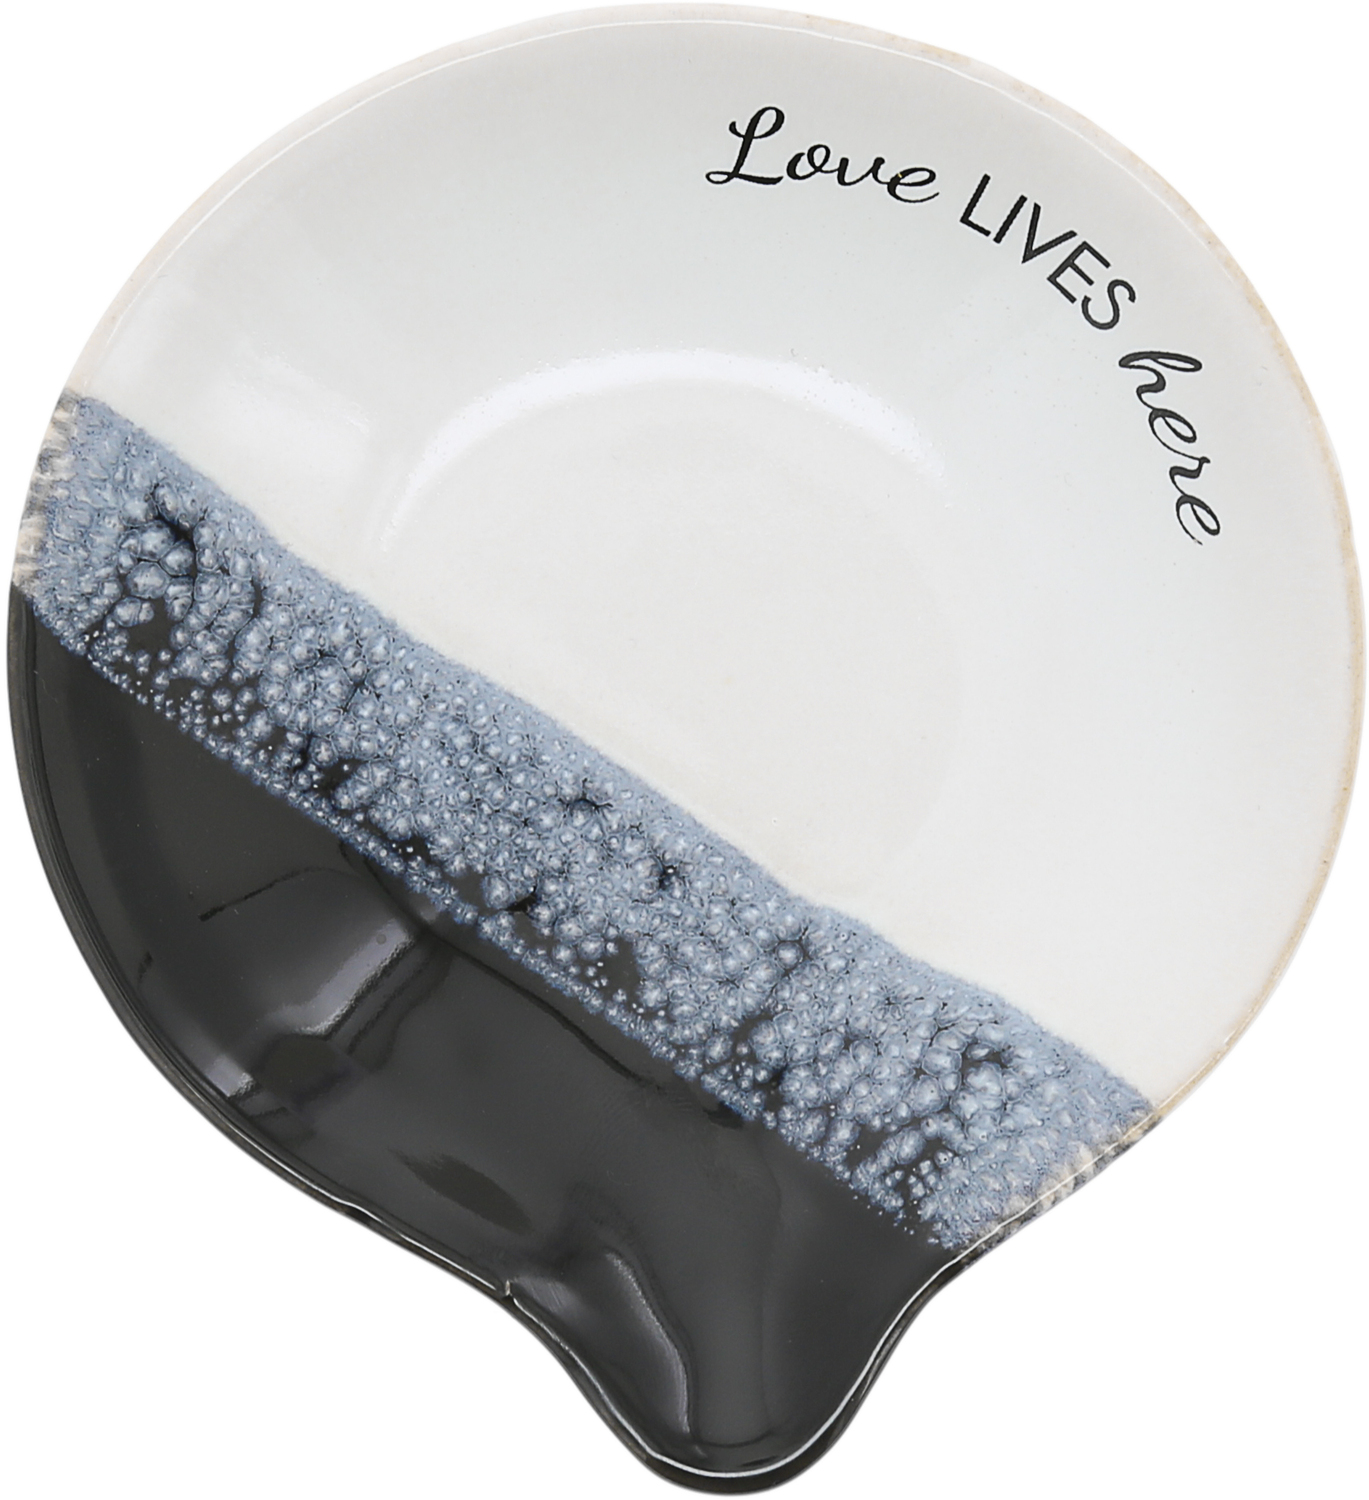 Love Lives Here by Hostess with the Mostess - Love Lives Here - 4" Spoon Rest